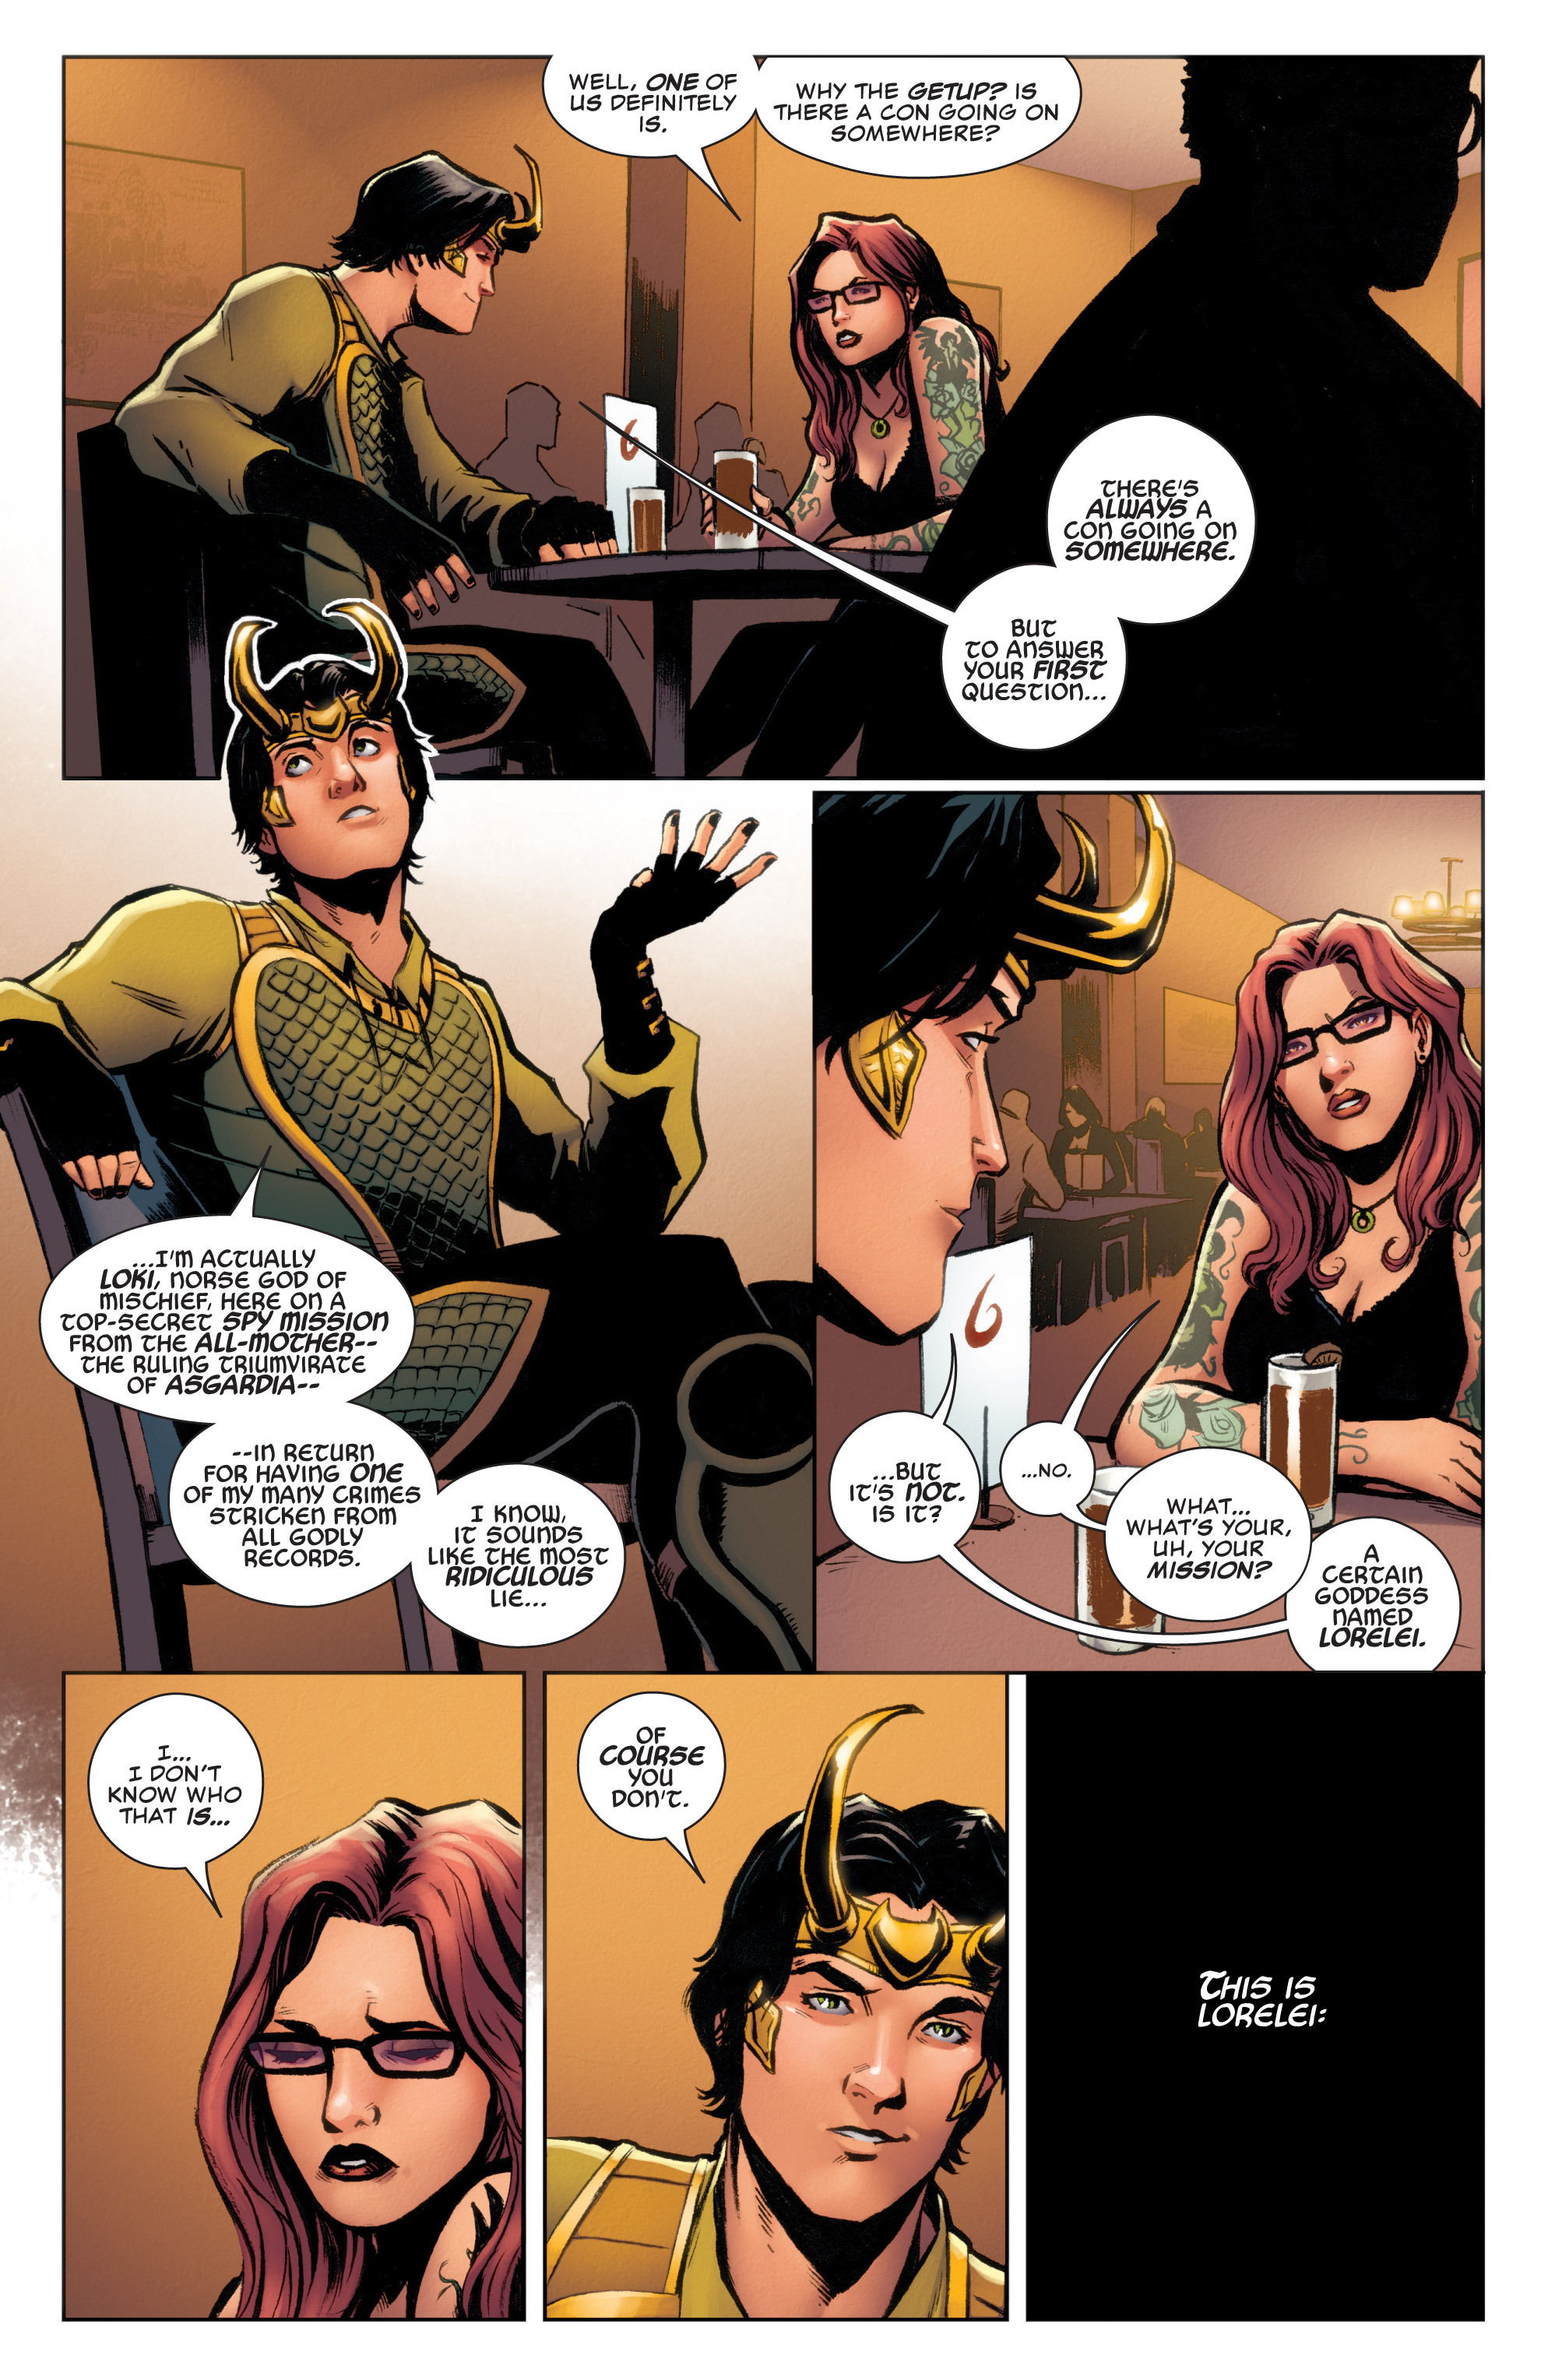 Loki Agent Of Asgard Issue 2 | Read Loki Agent Of Asgard Issue 2 comic  online in high quality. Read Full Comic online for free - Read comics  online in high quality .